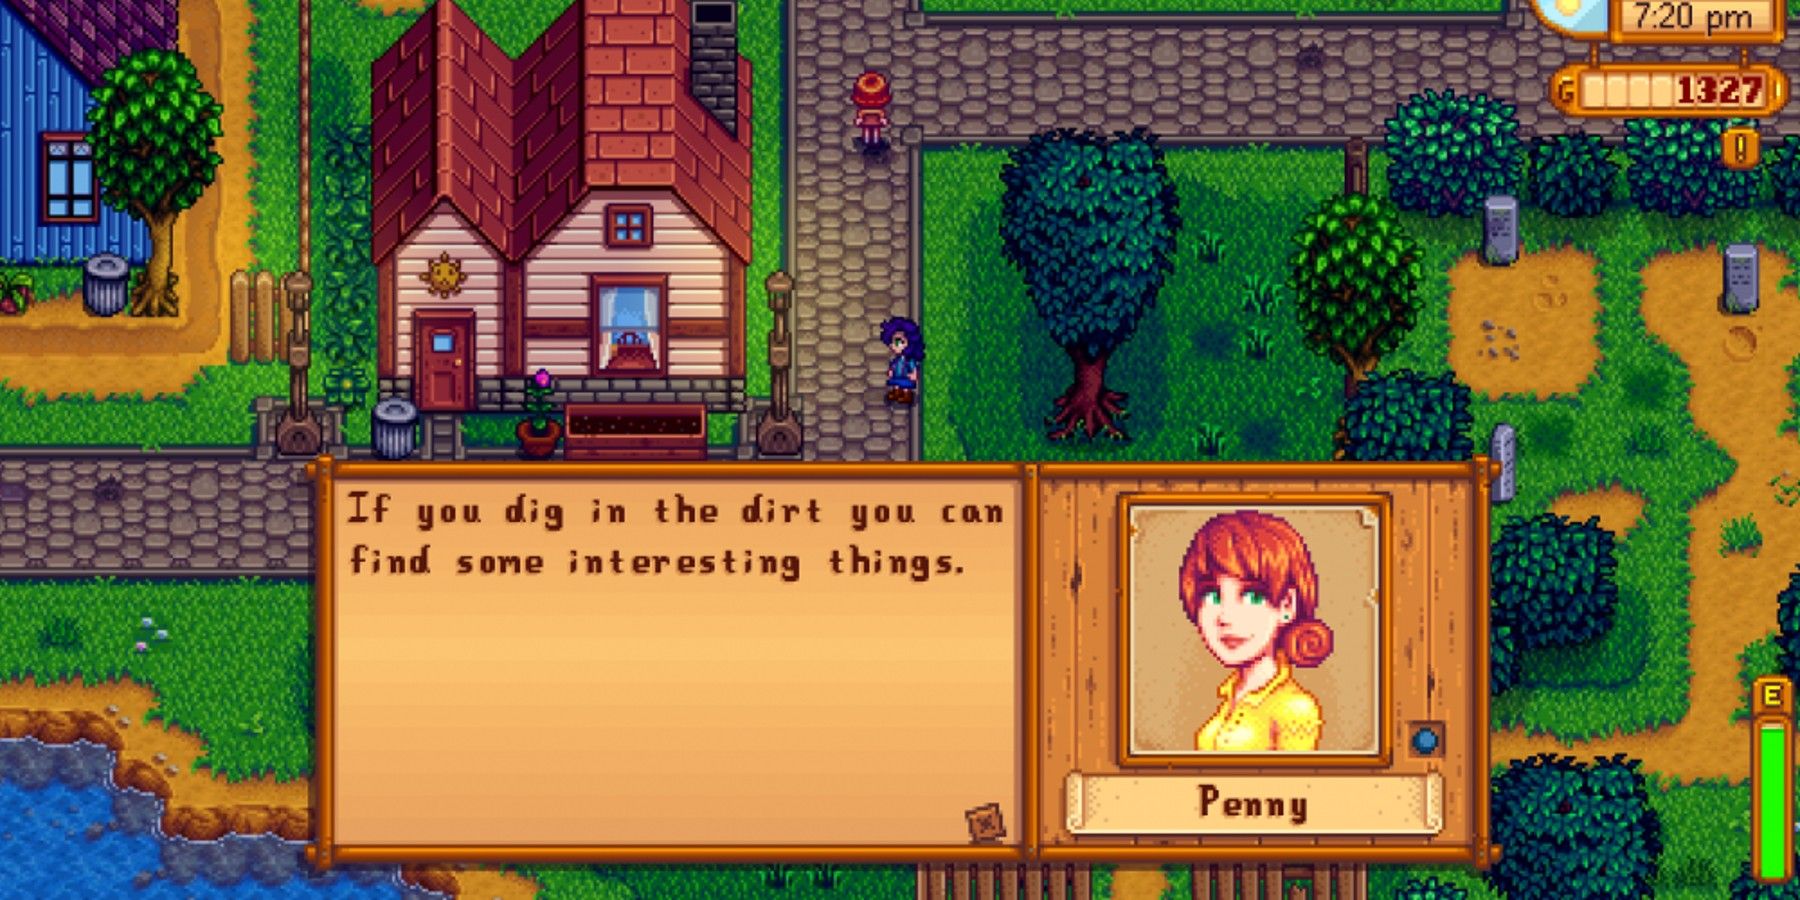 stardew-valley-penny-dialogue-digging